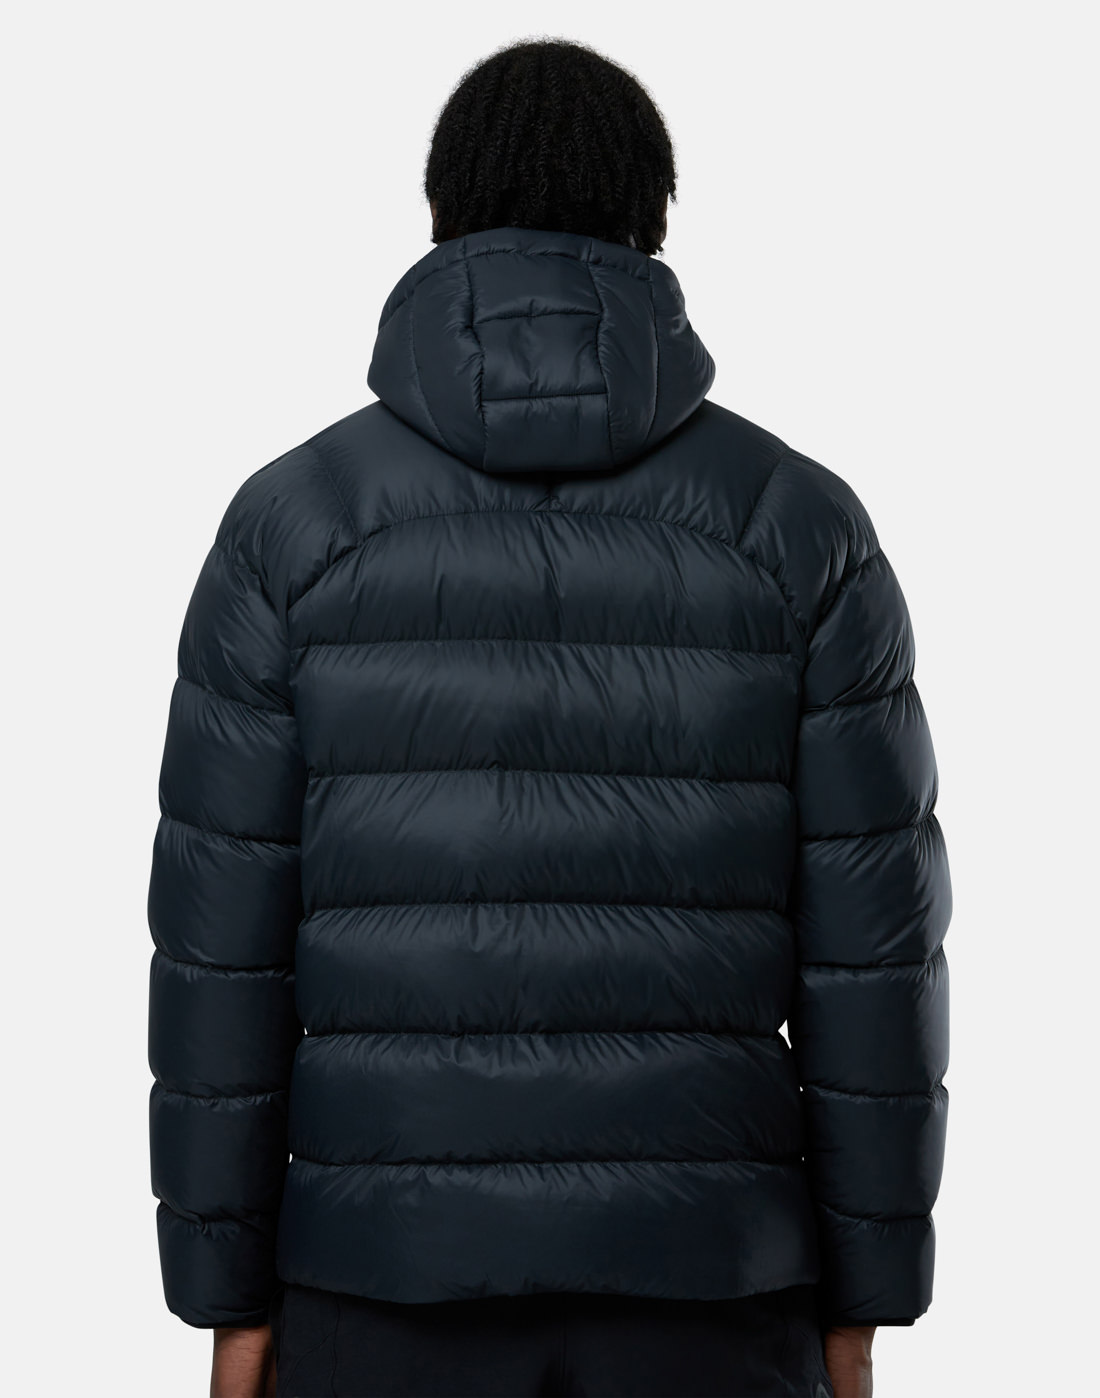 Under Armour Mens Storm Armour Down Jacket - Black | Life Style Sports IE